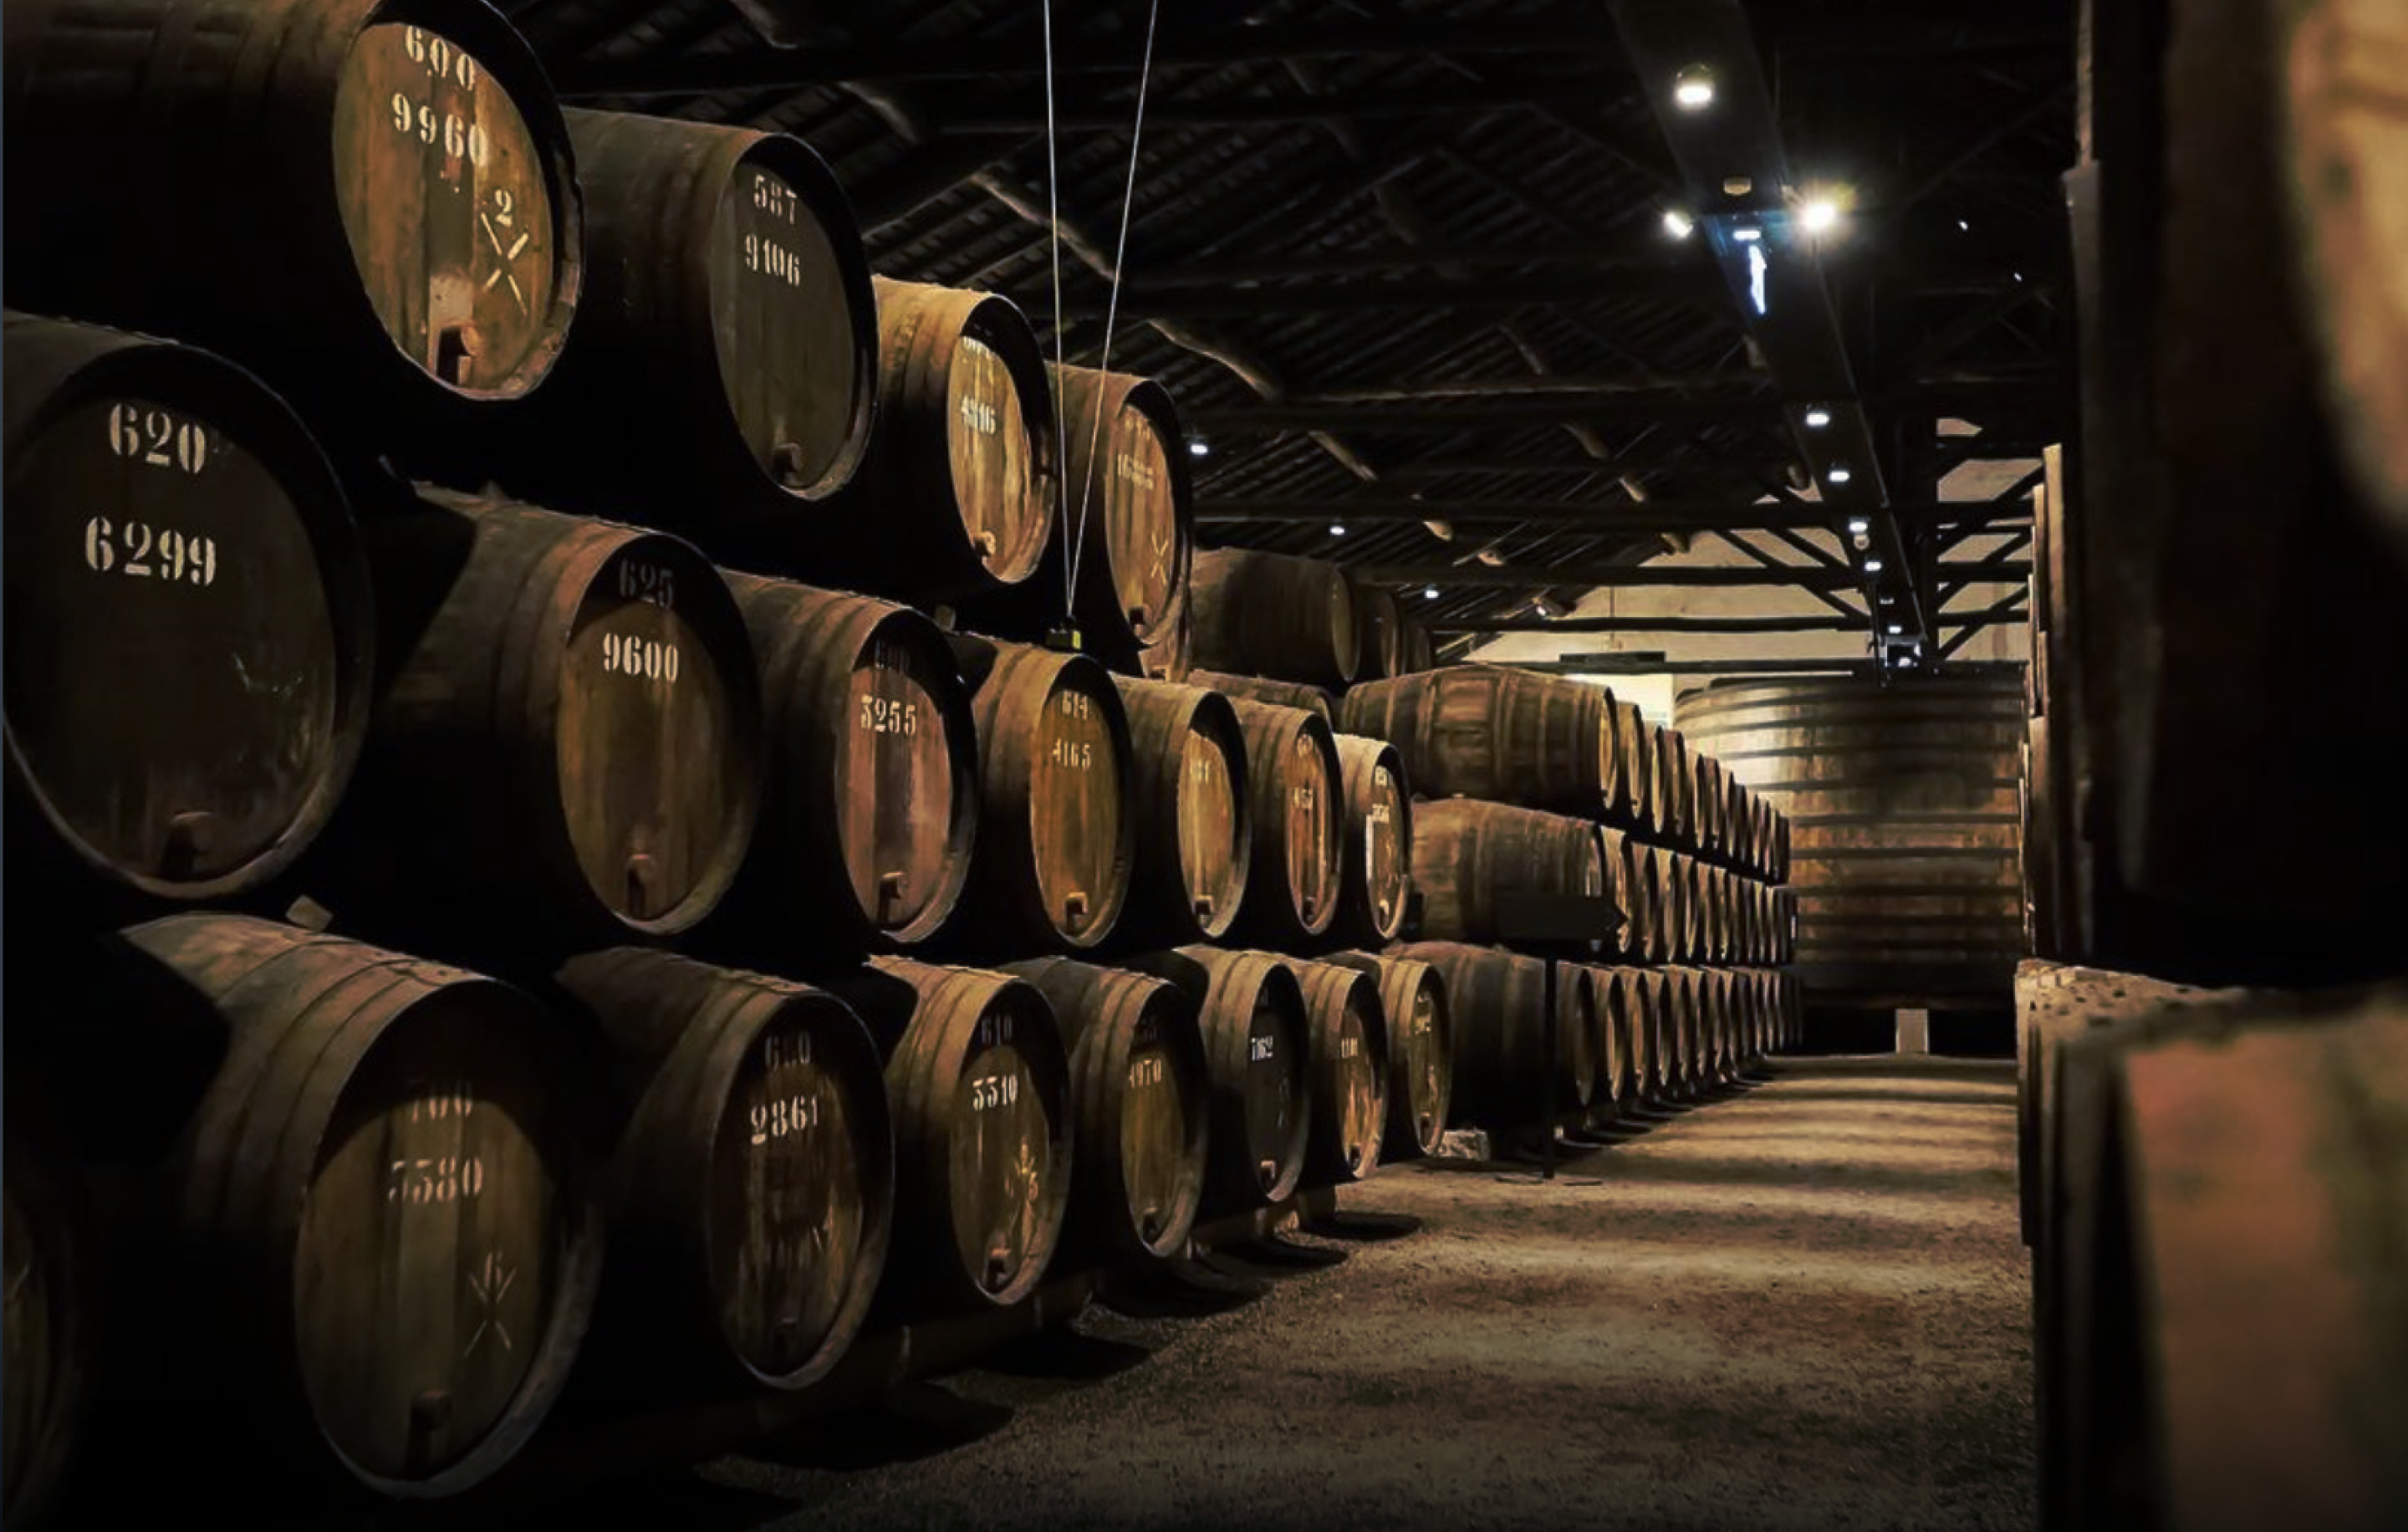 whisky cask investments in storage